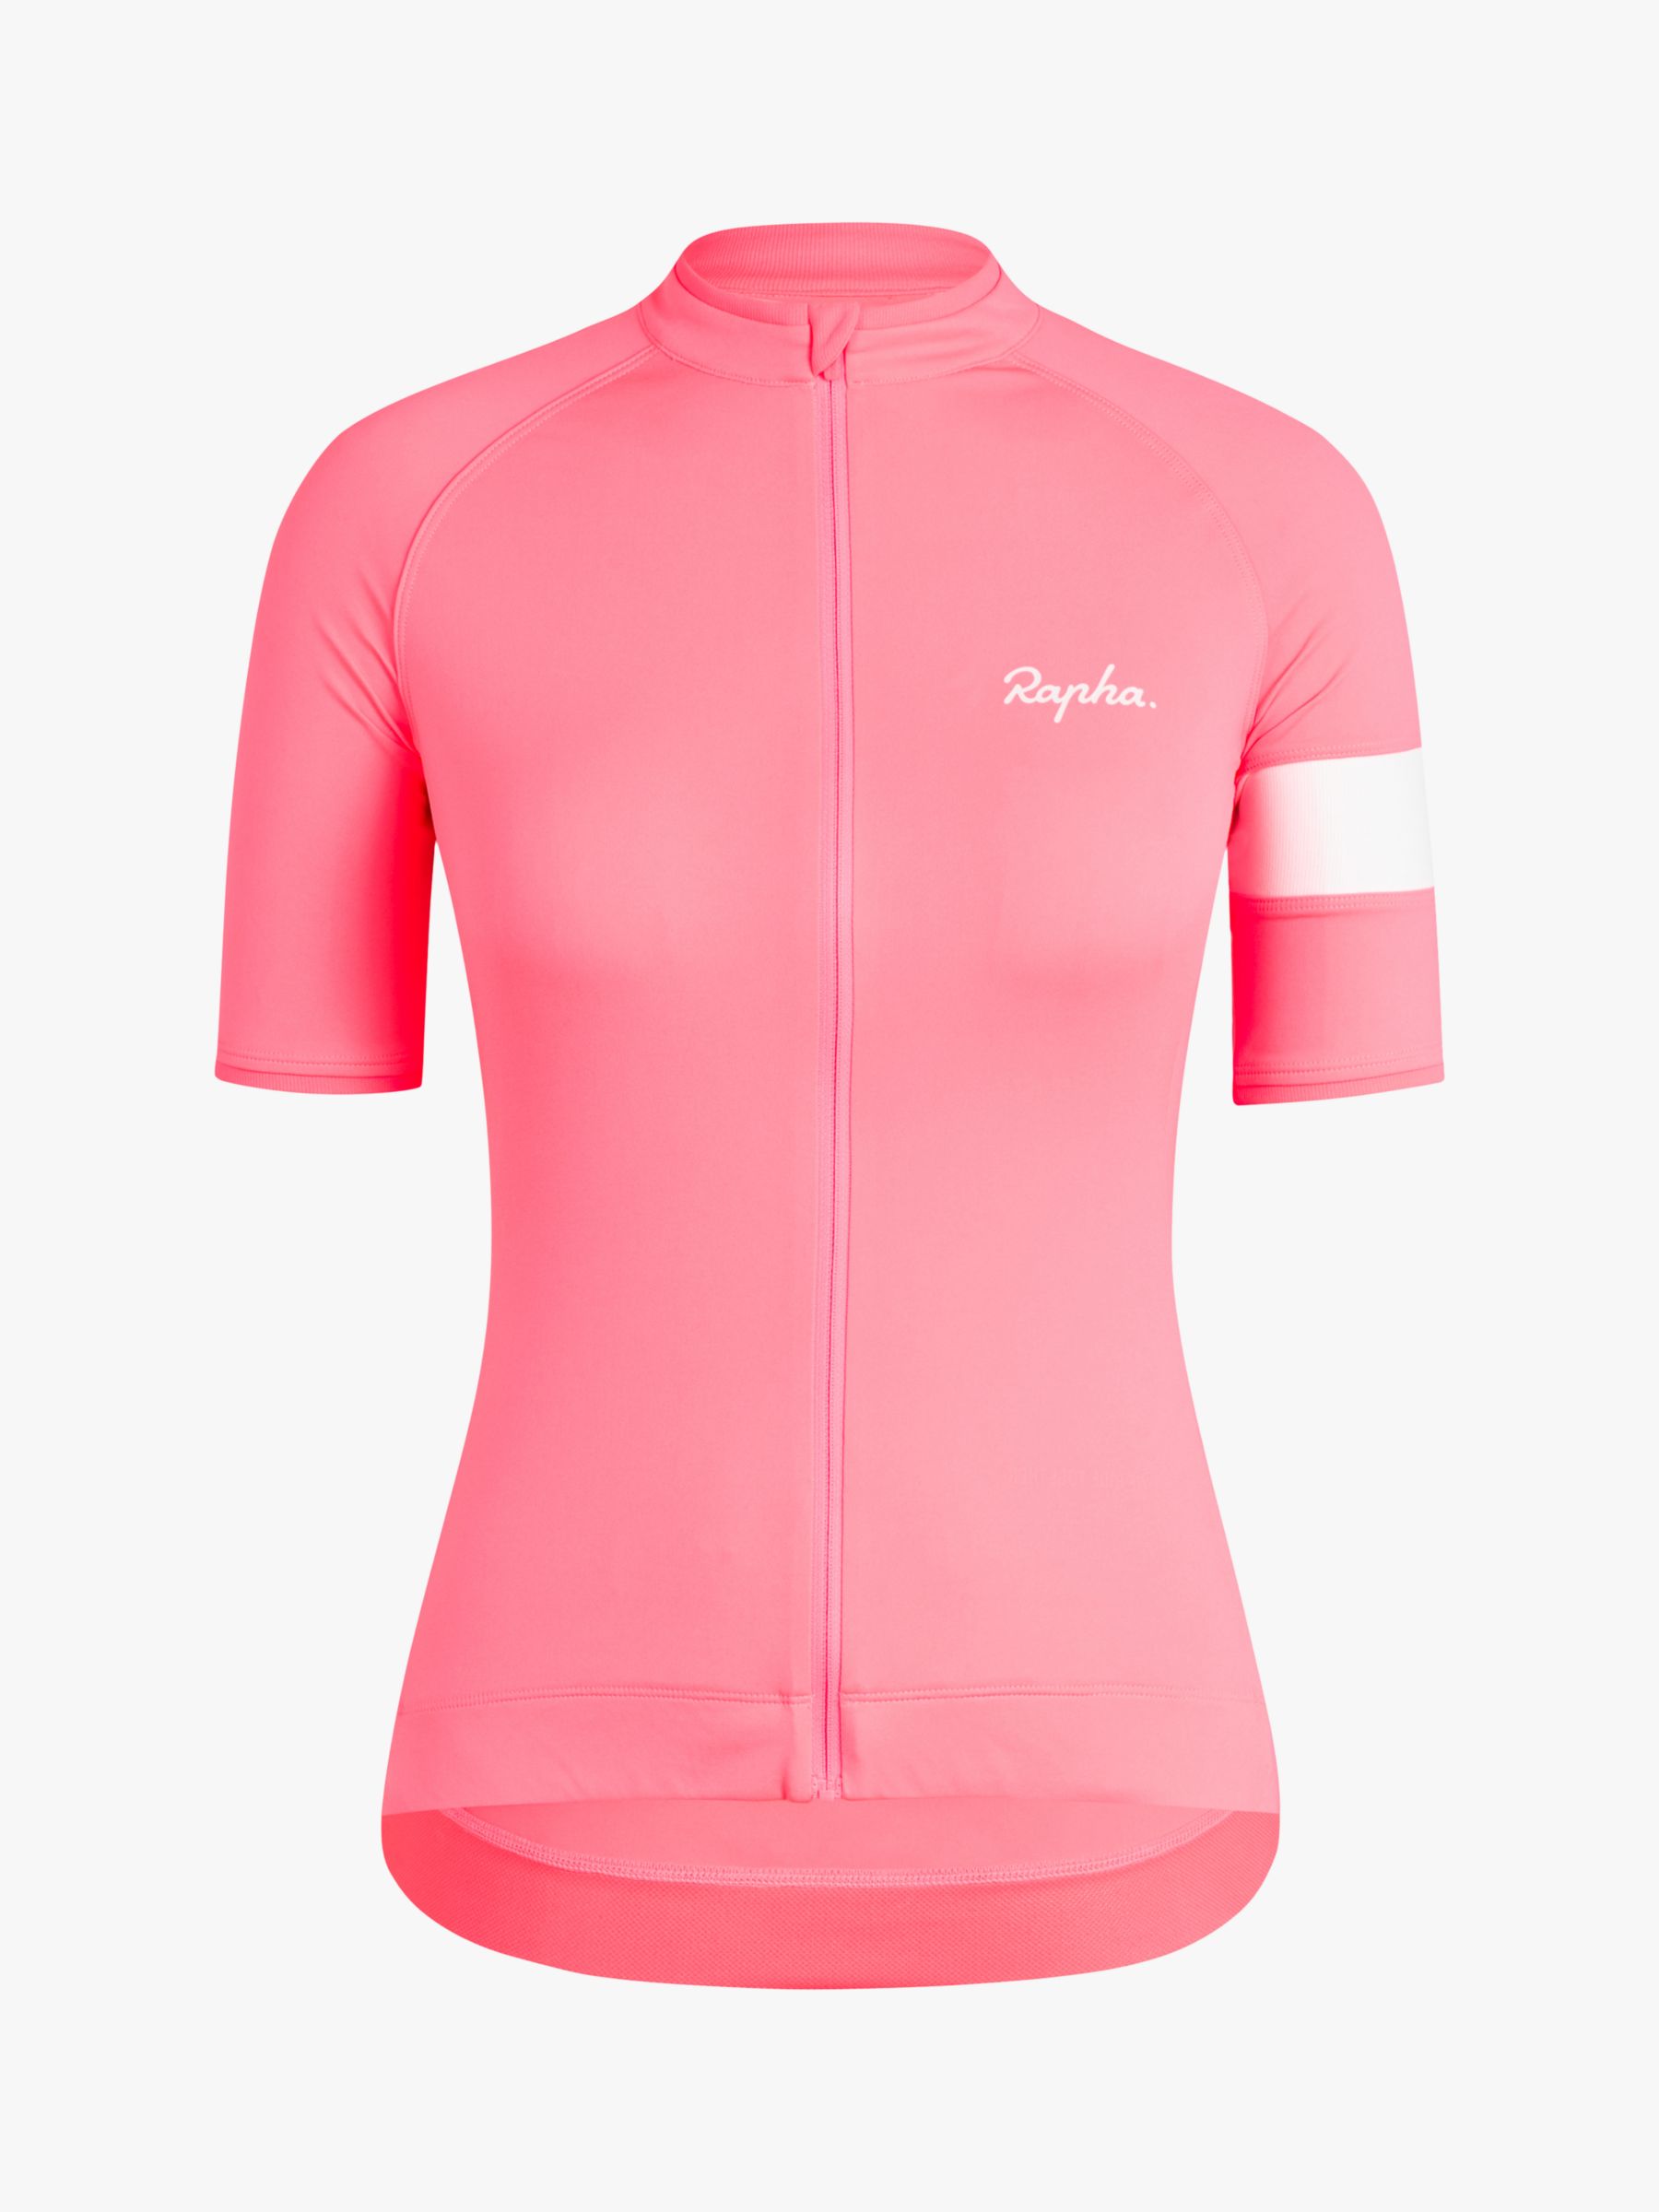 Rapha Core Jersey Short Sleeve Cycling Top, High-vis Pink, S